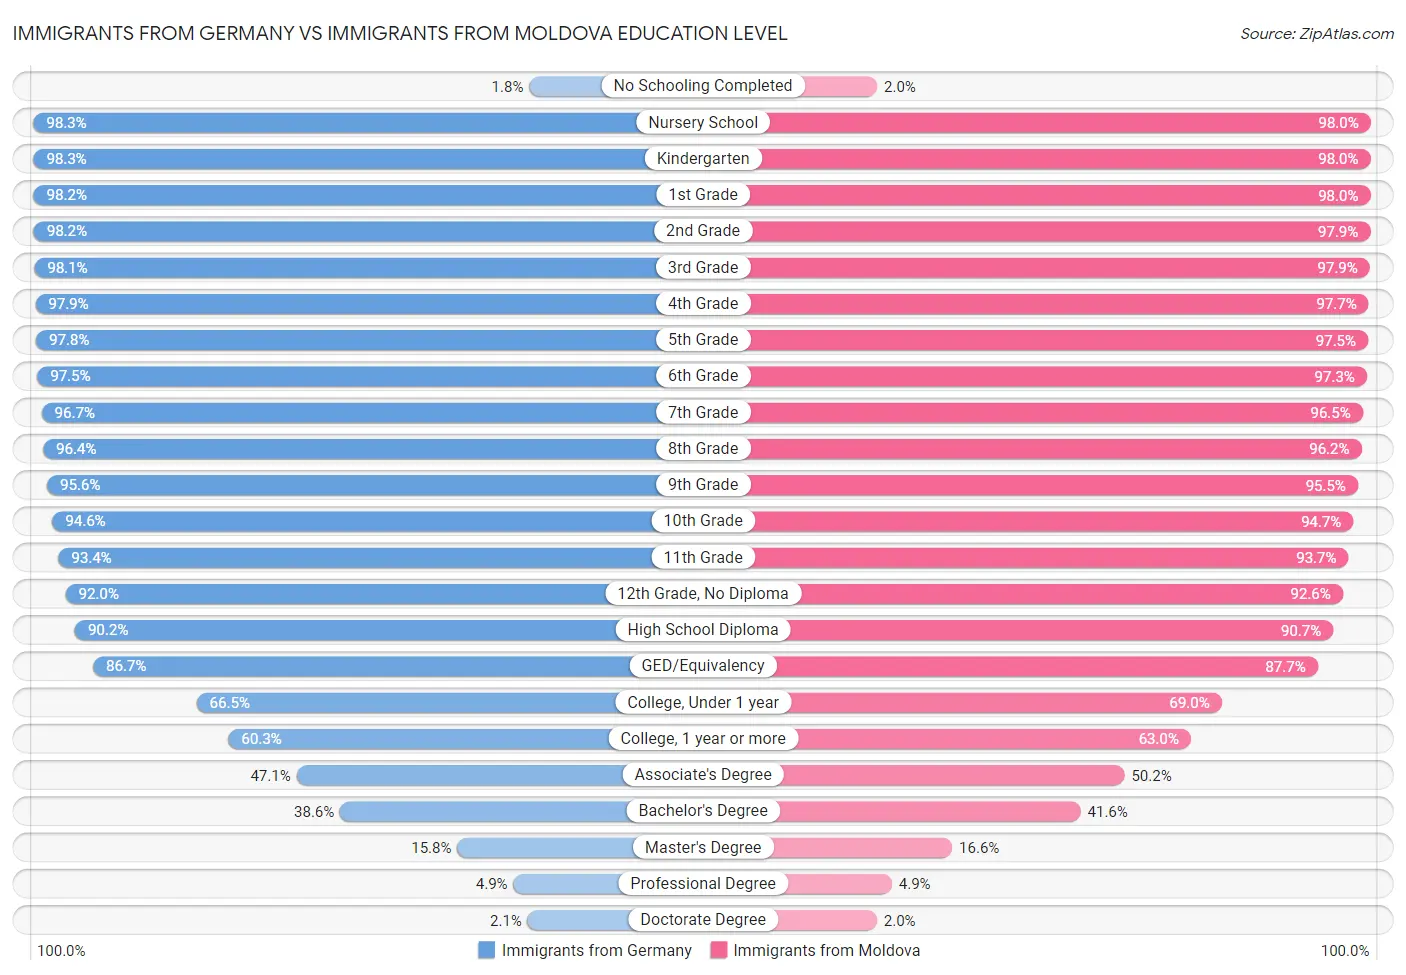 Immigrants from Germany vs Immigrants from Moldova Education Level